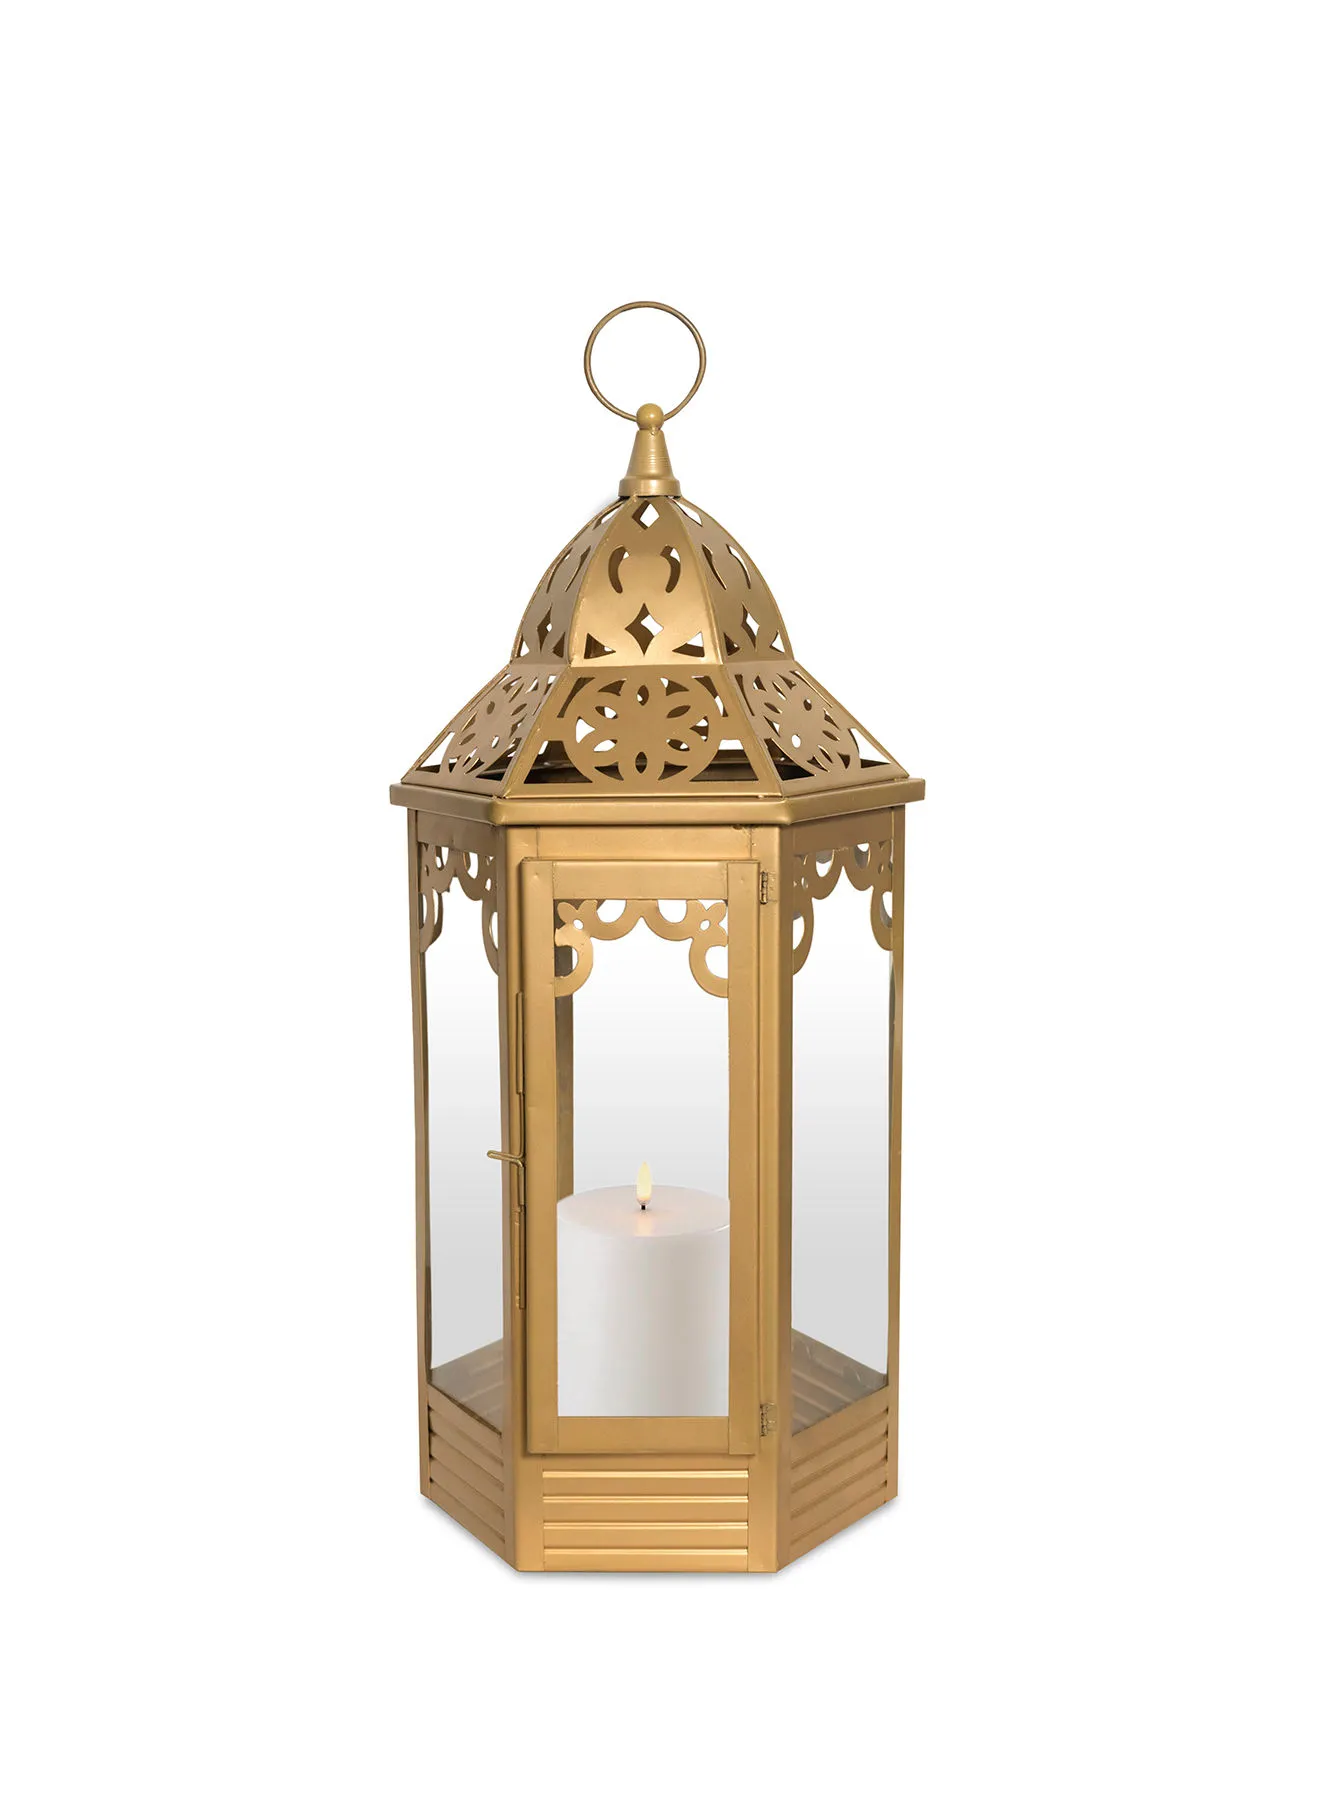 ebb & flow Modern Ideal Design Handmade Lantern  Unique Luxury Quality Scents For The Perfect Stylish Home Gold 18X18X54centimeter